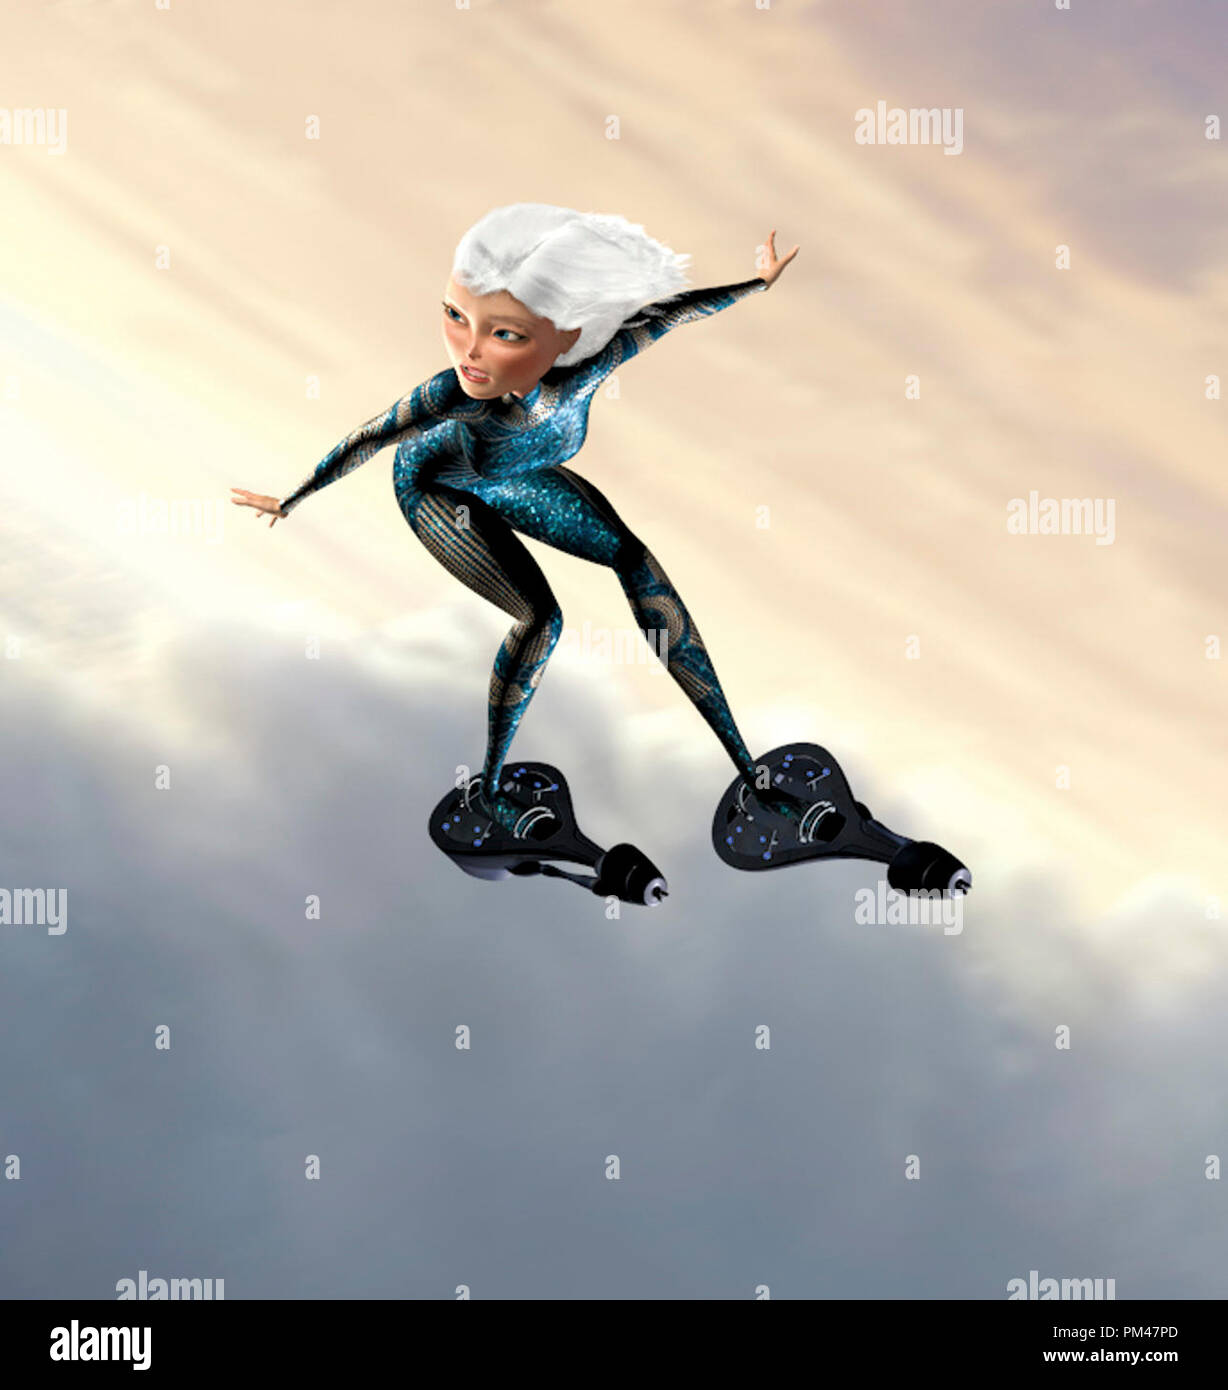 Ginormica (REESE WITHERSPOON) powers through the atmosphere. DreamWorks Animation SKG  Presents “Monsters vs. Aliens,” a Paramount Pictures release 2009 Stock Photo